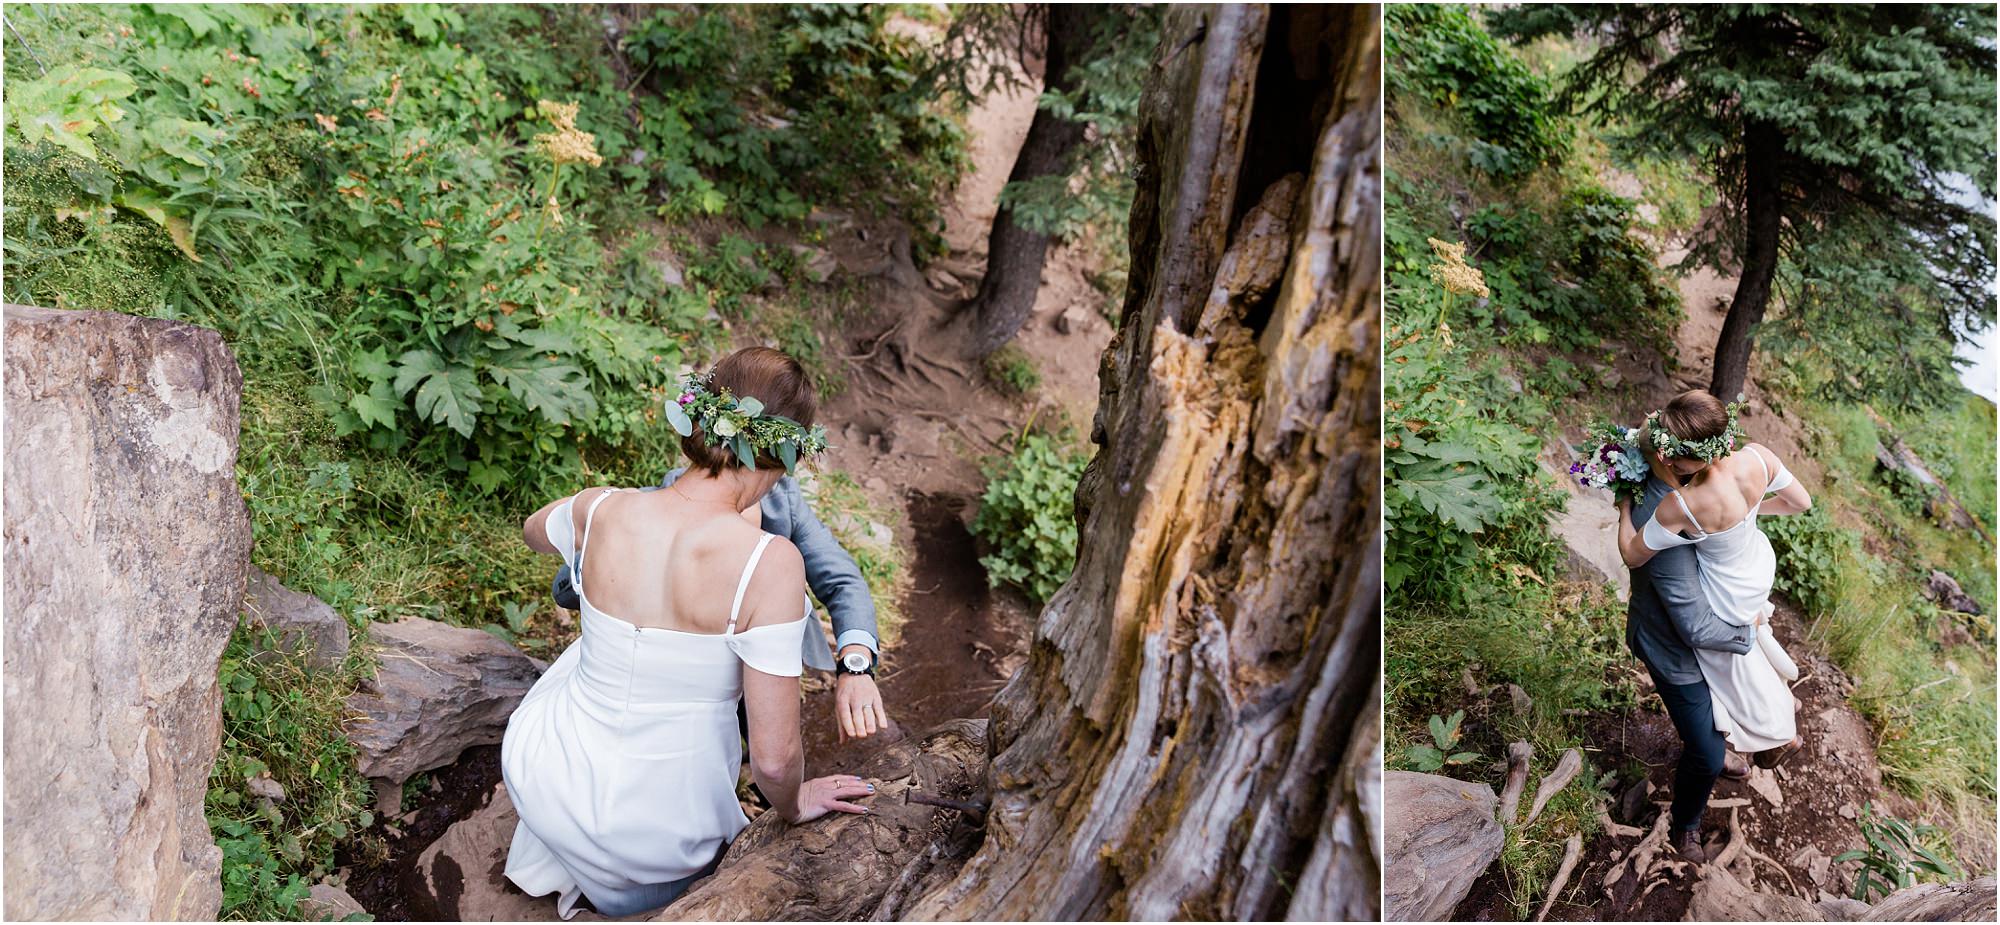 A newly married couple hikes down the trail climbing down large tree roots for photos at their Tumalo Falls elopement in Bend, Oregon. | Erica Swantek Photography